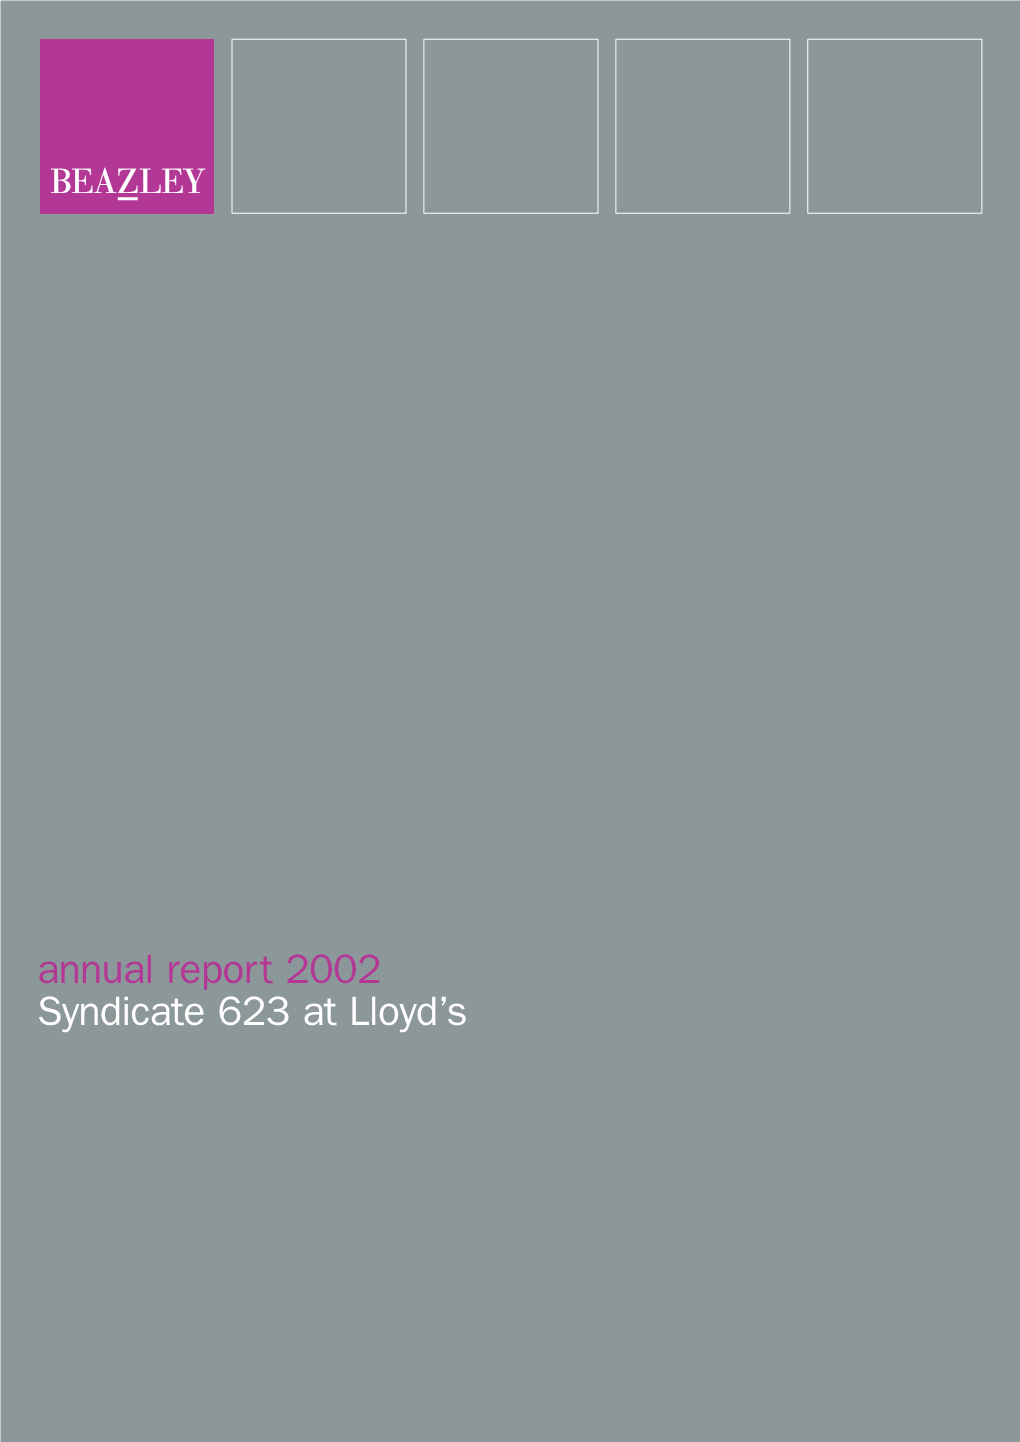 Annual Report 2002 Syndicate 623 at Lloyd's